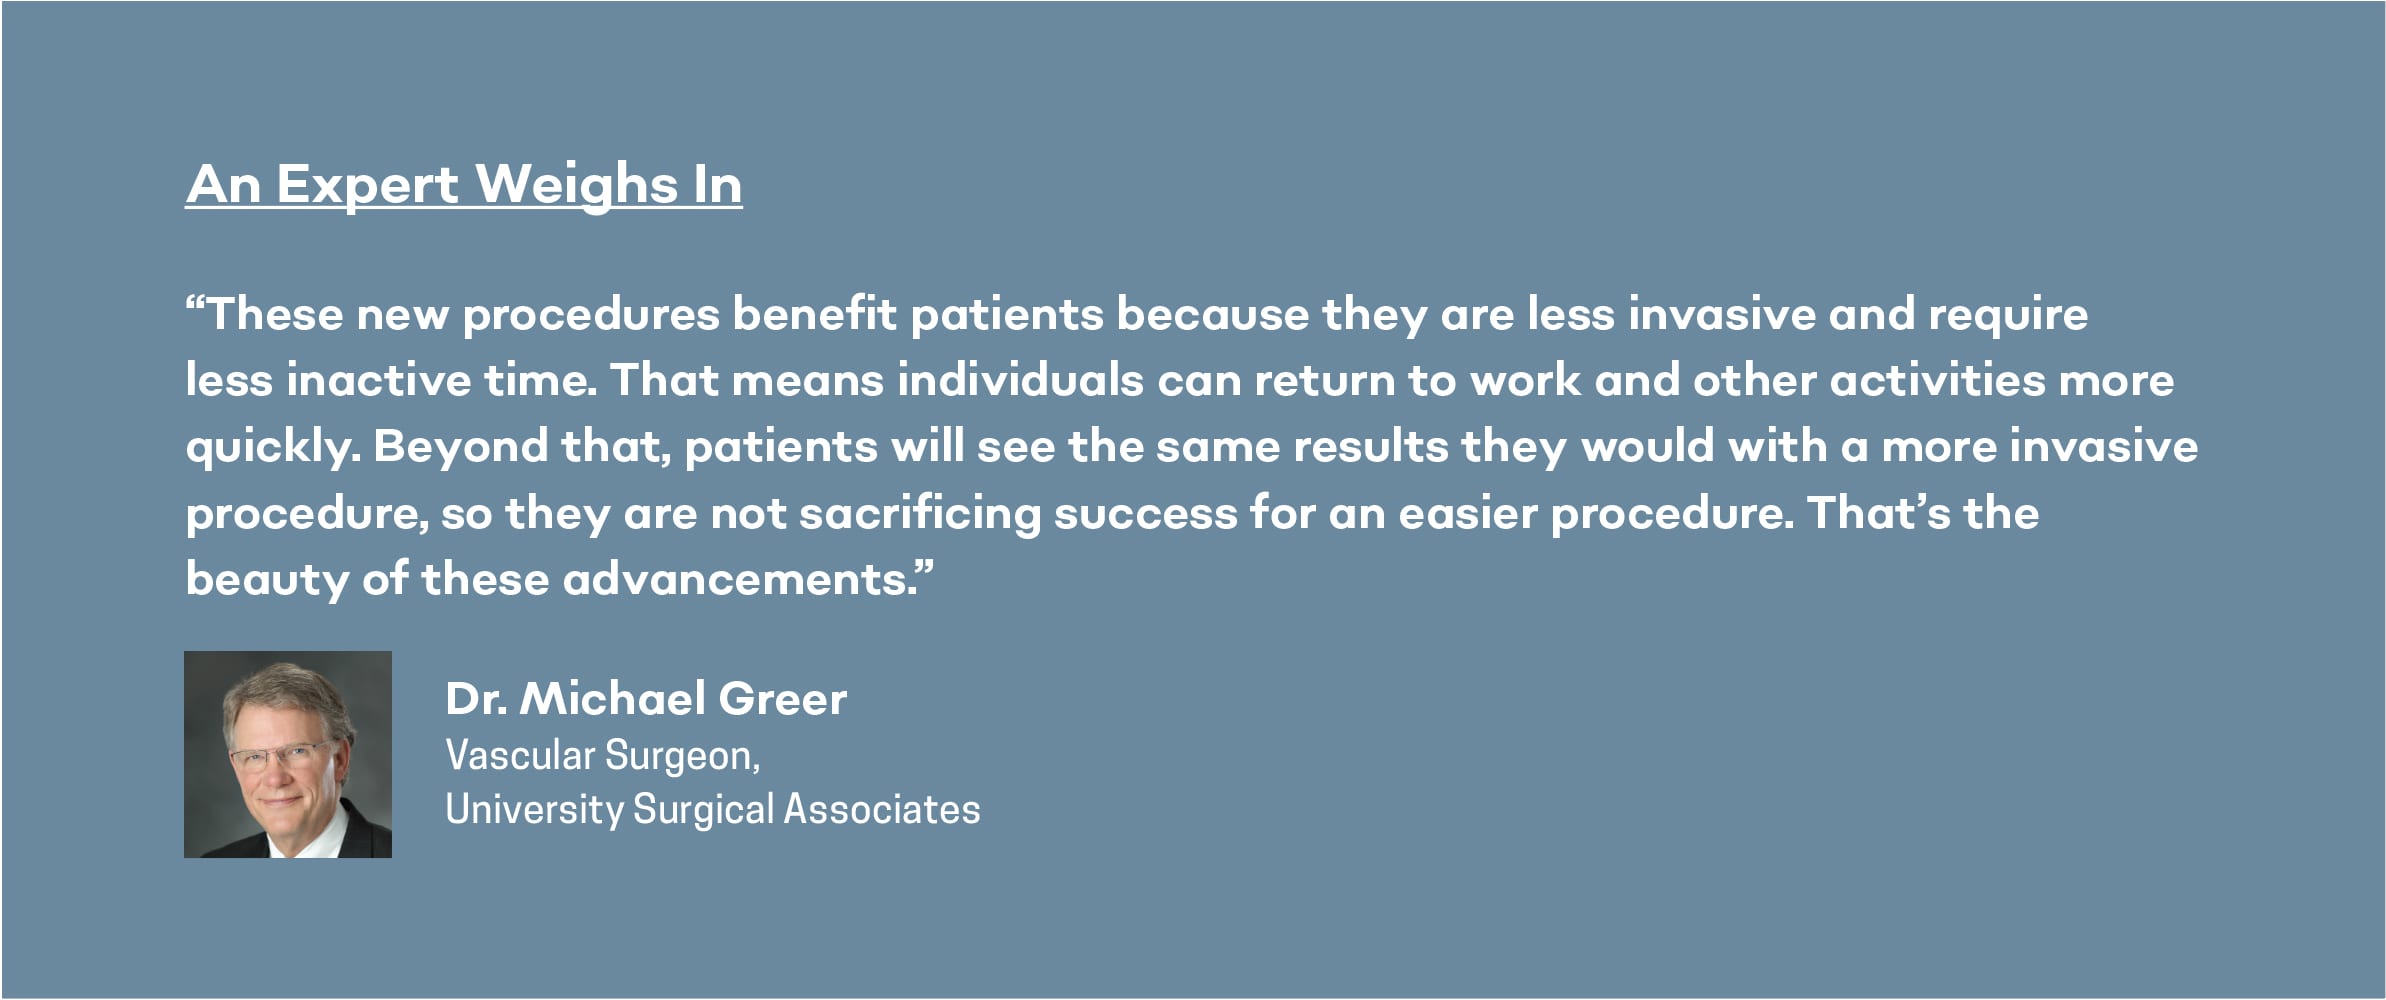 expert opinion on advancements in treating varicose veins in chattanooga from Dr. Michael Greer